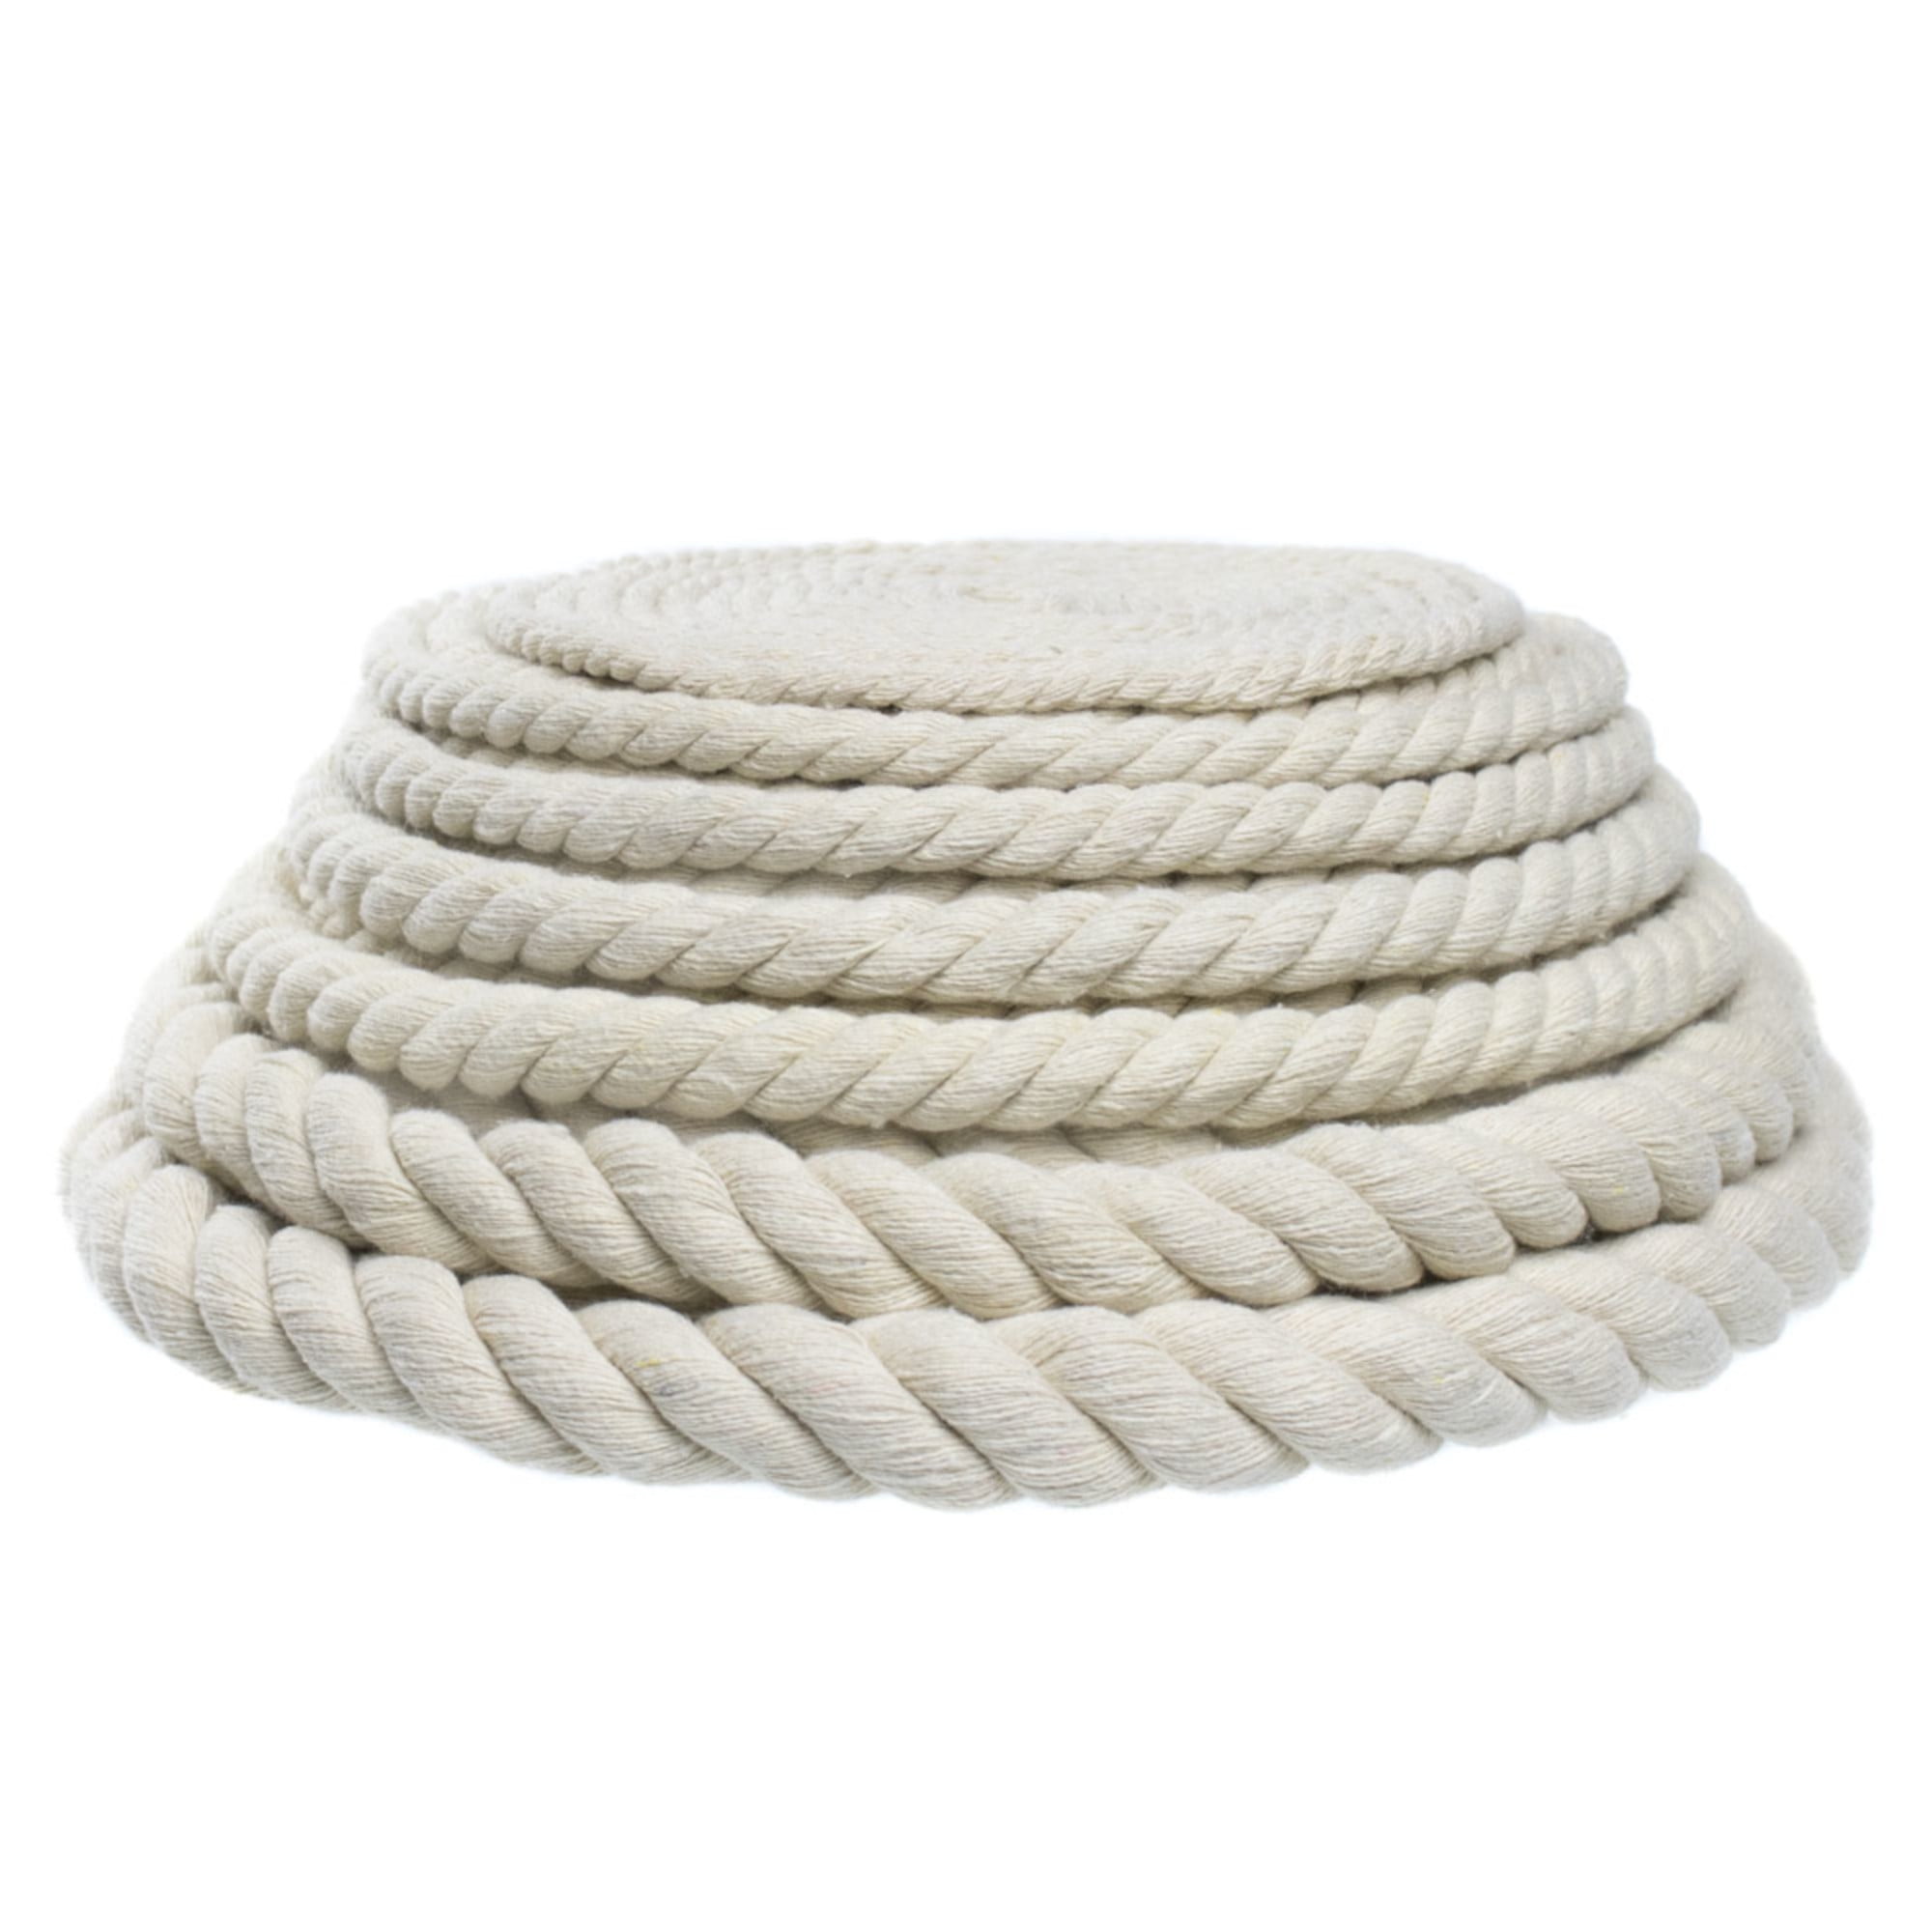 FMS Natural Colored Cotton Rope - White White & Black3/4 x 350 FT